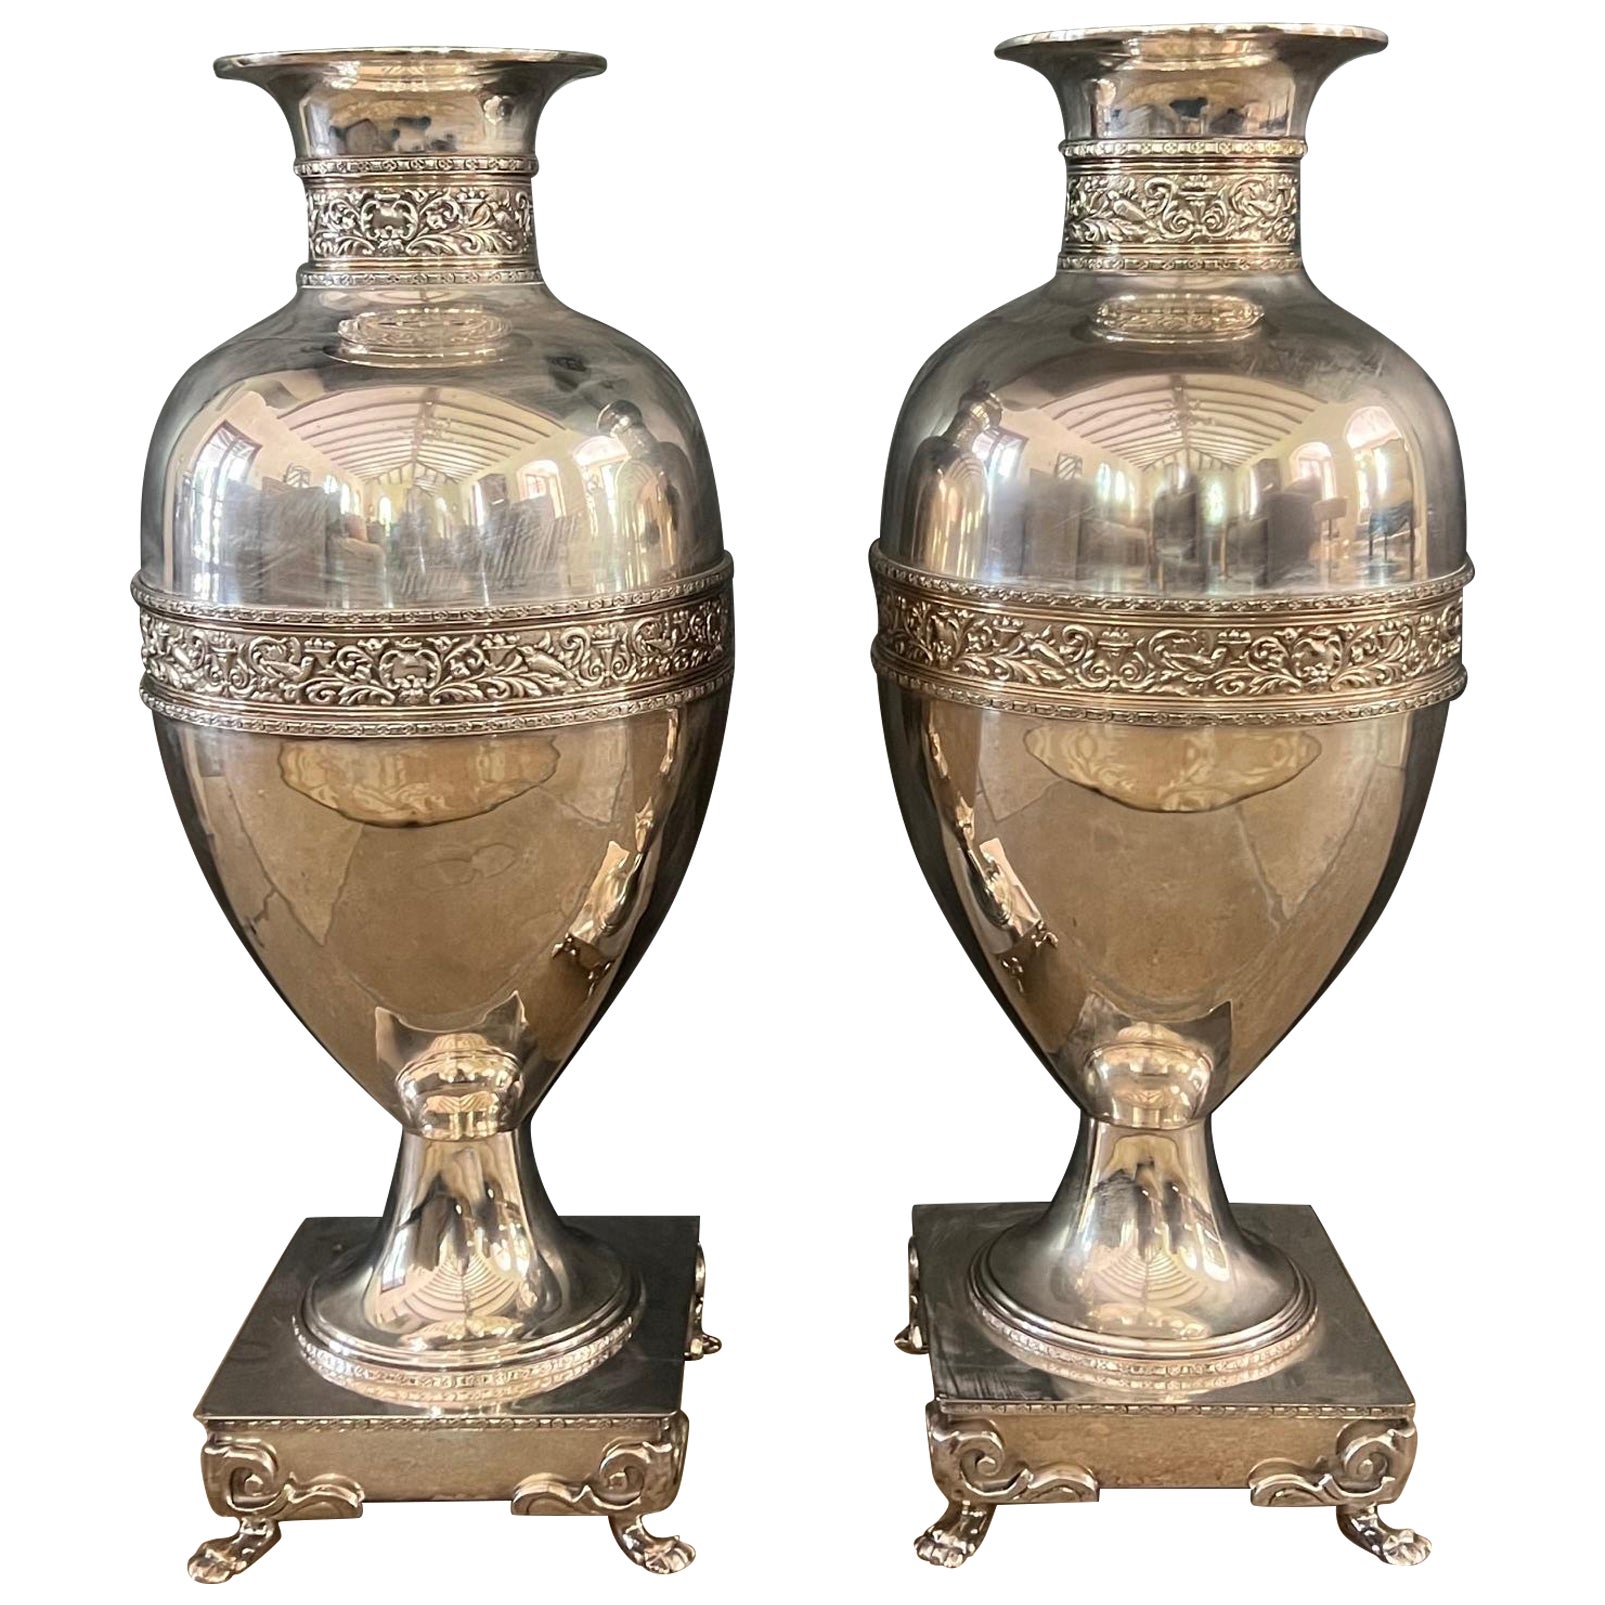 Large Antique Silverplated Urns, Set of 2